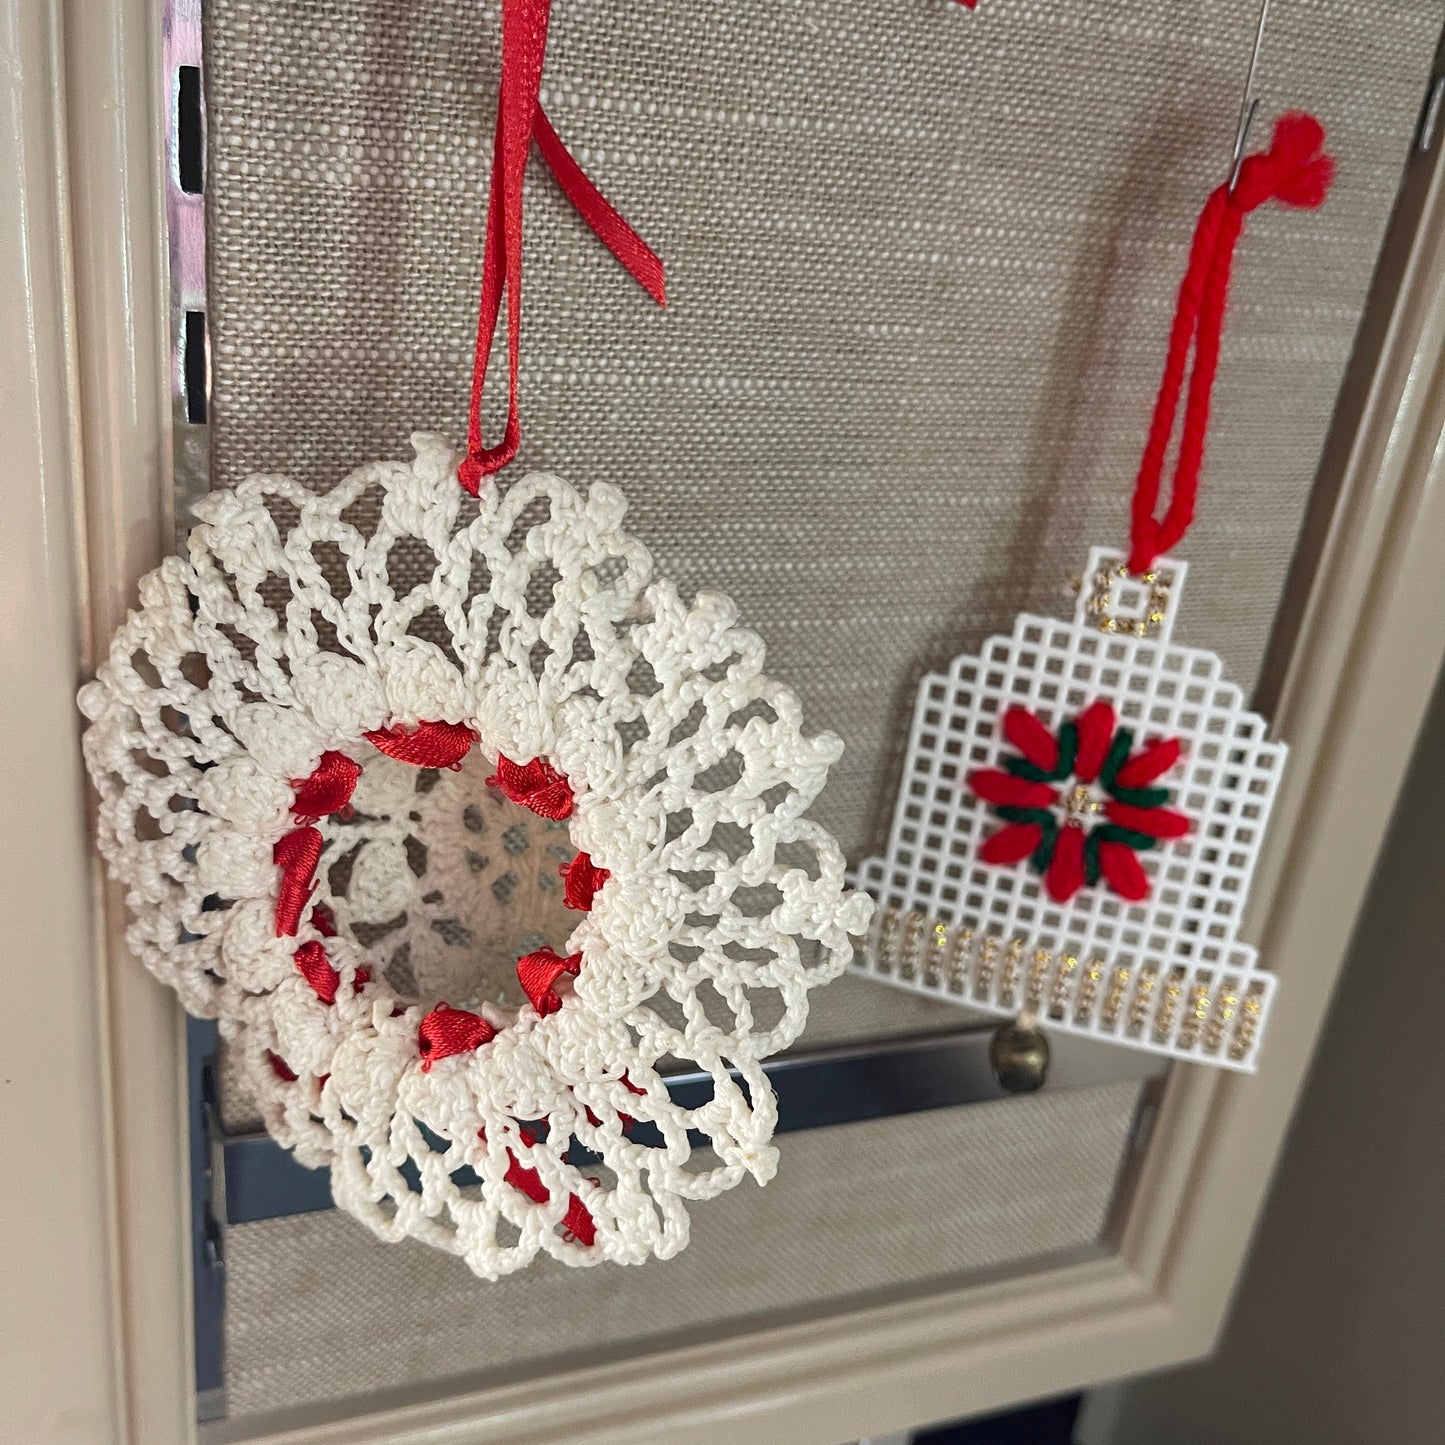 Handmade Christmas ornaments choice of simply beautiful holiday decorations: